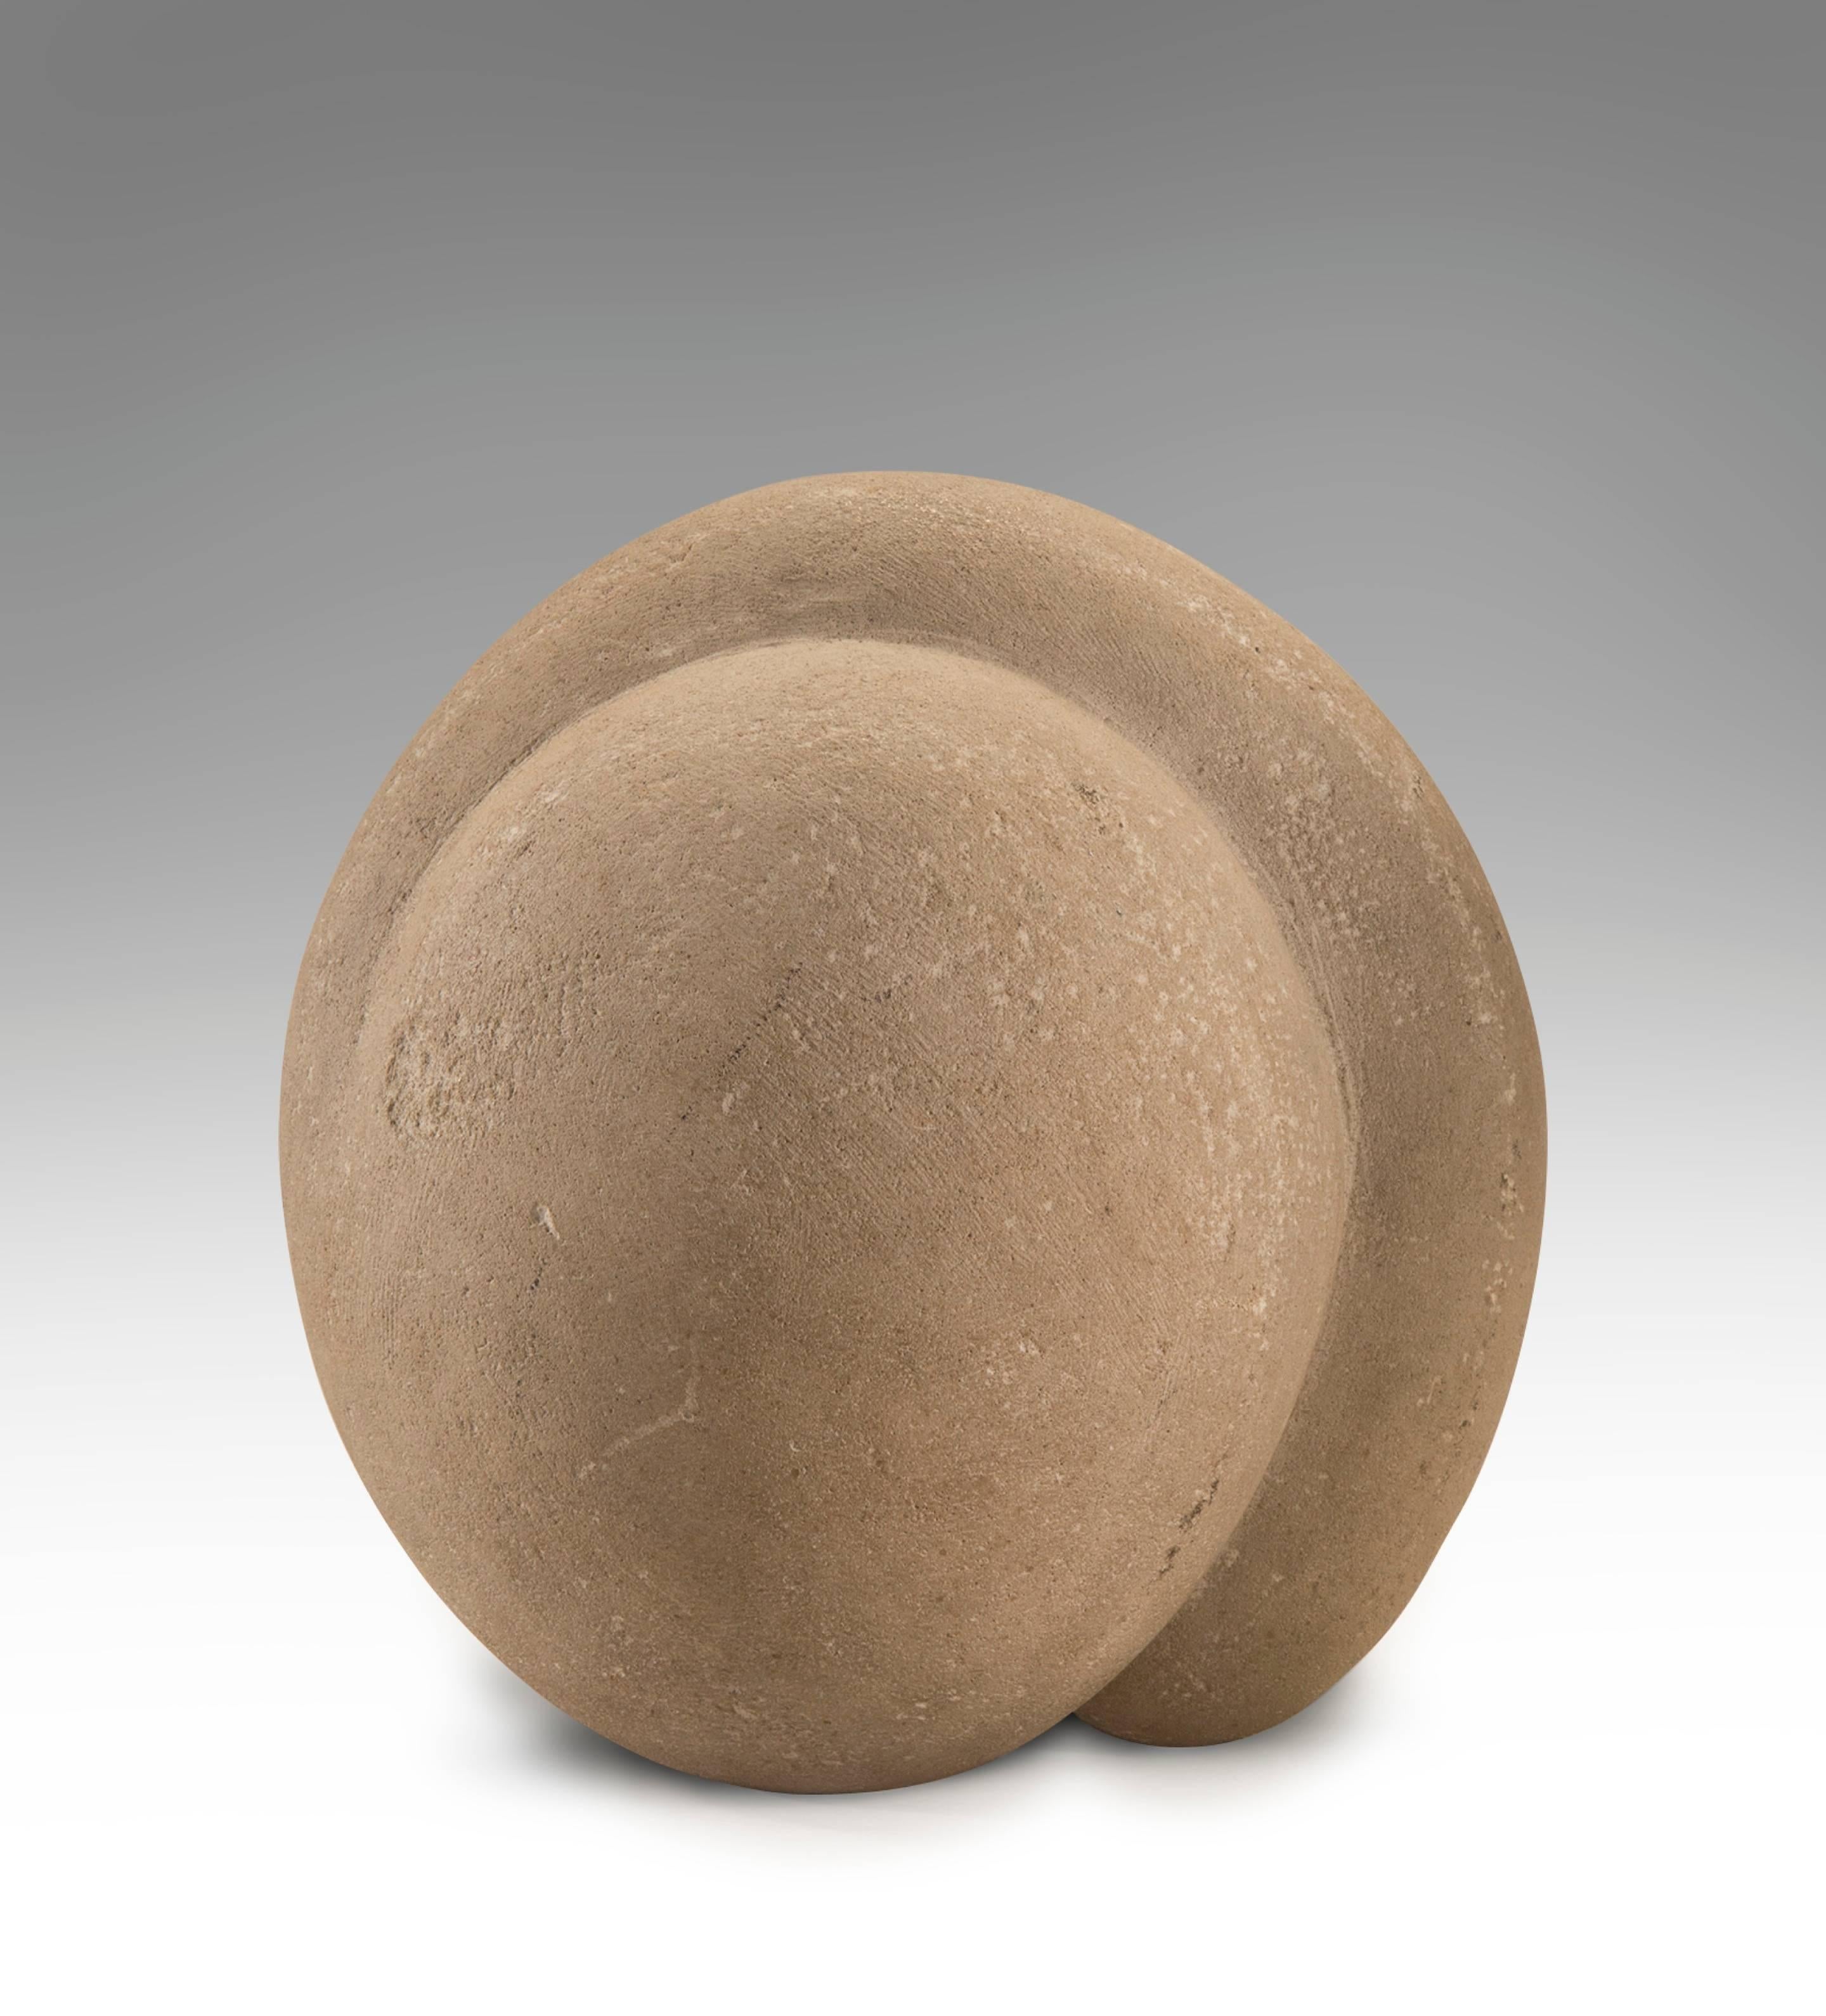 Shell-like of gently curling abstract tripartite form with a natural, soft surface.